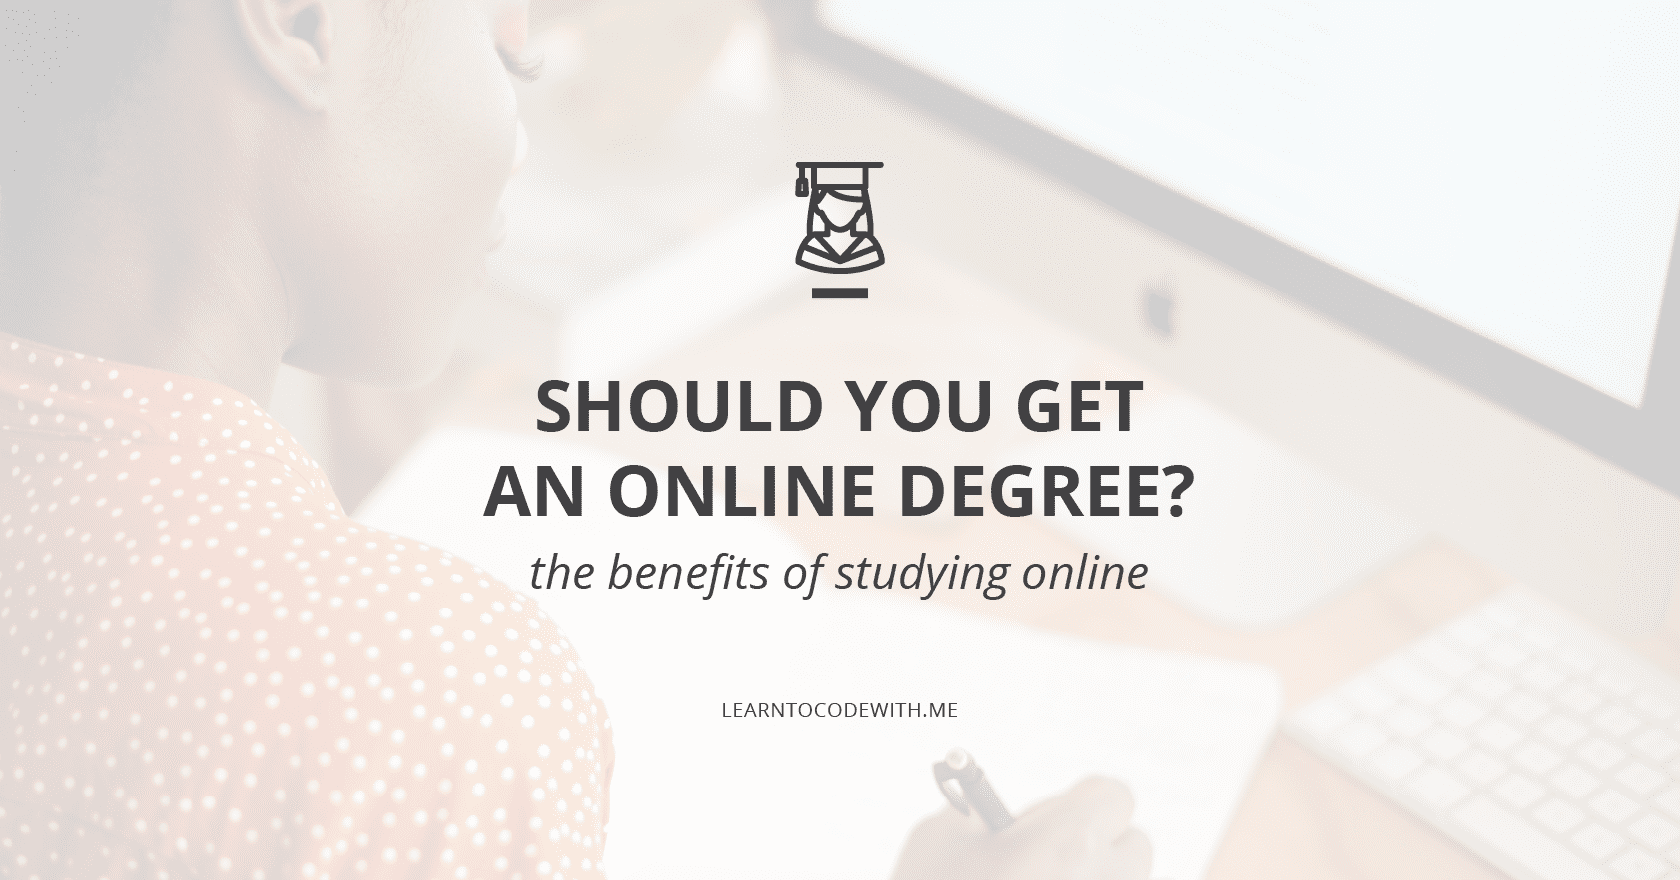 Should You Get an Online Degree?